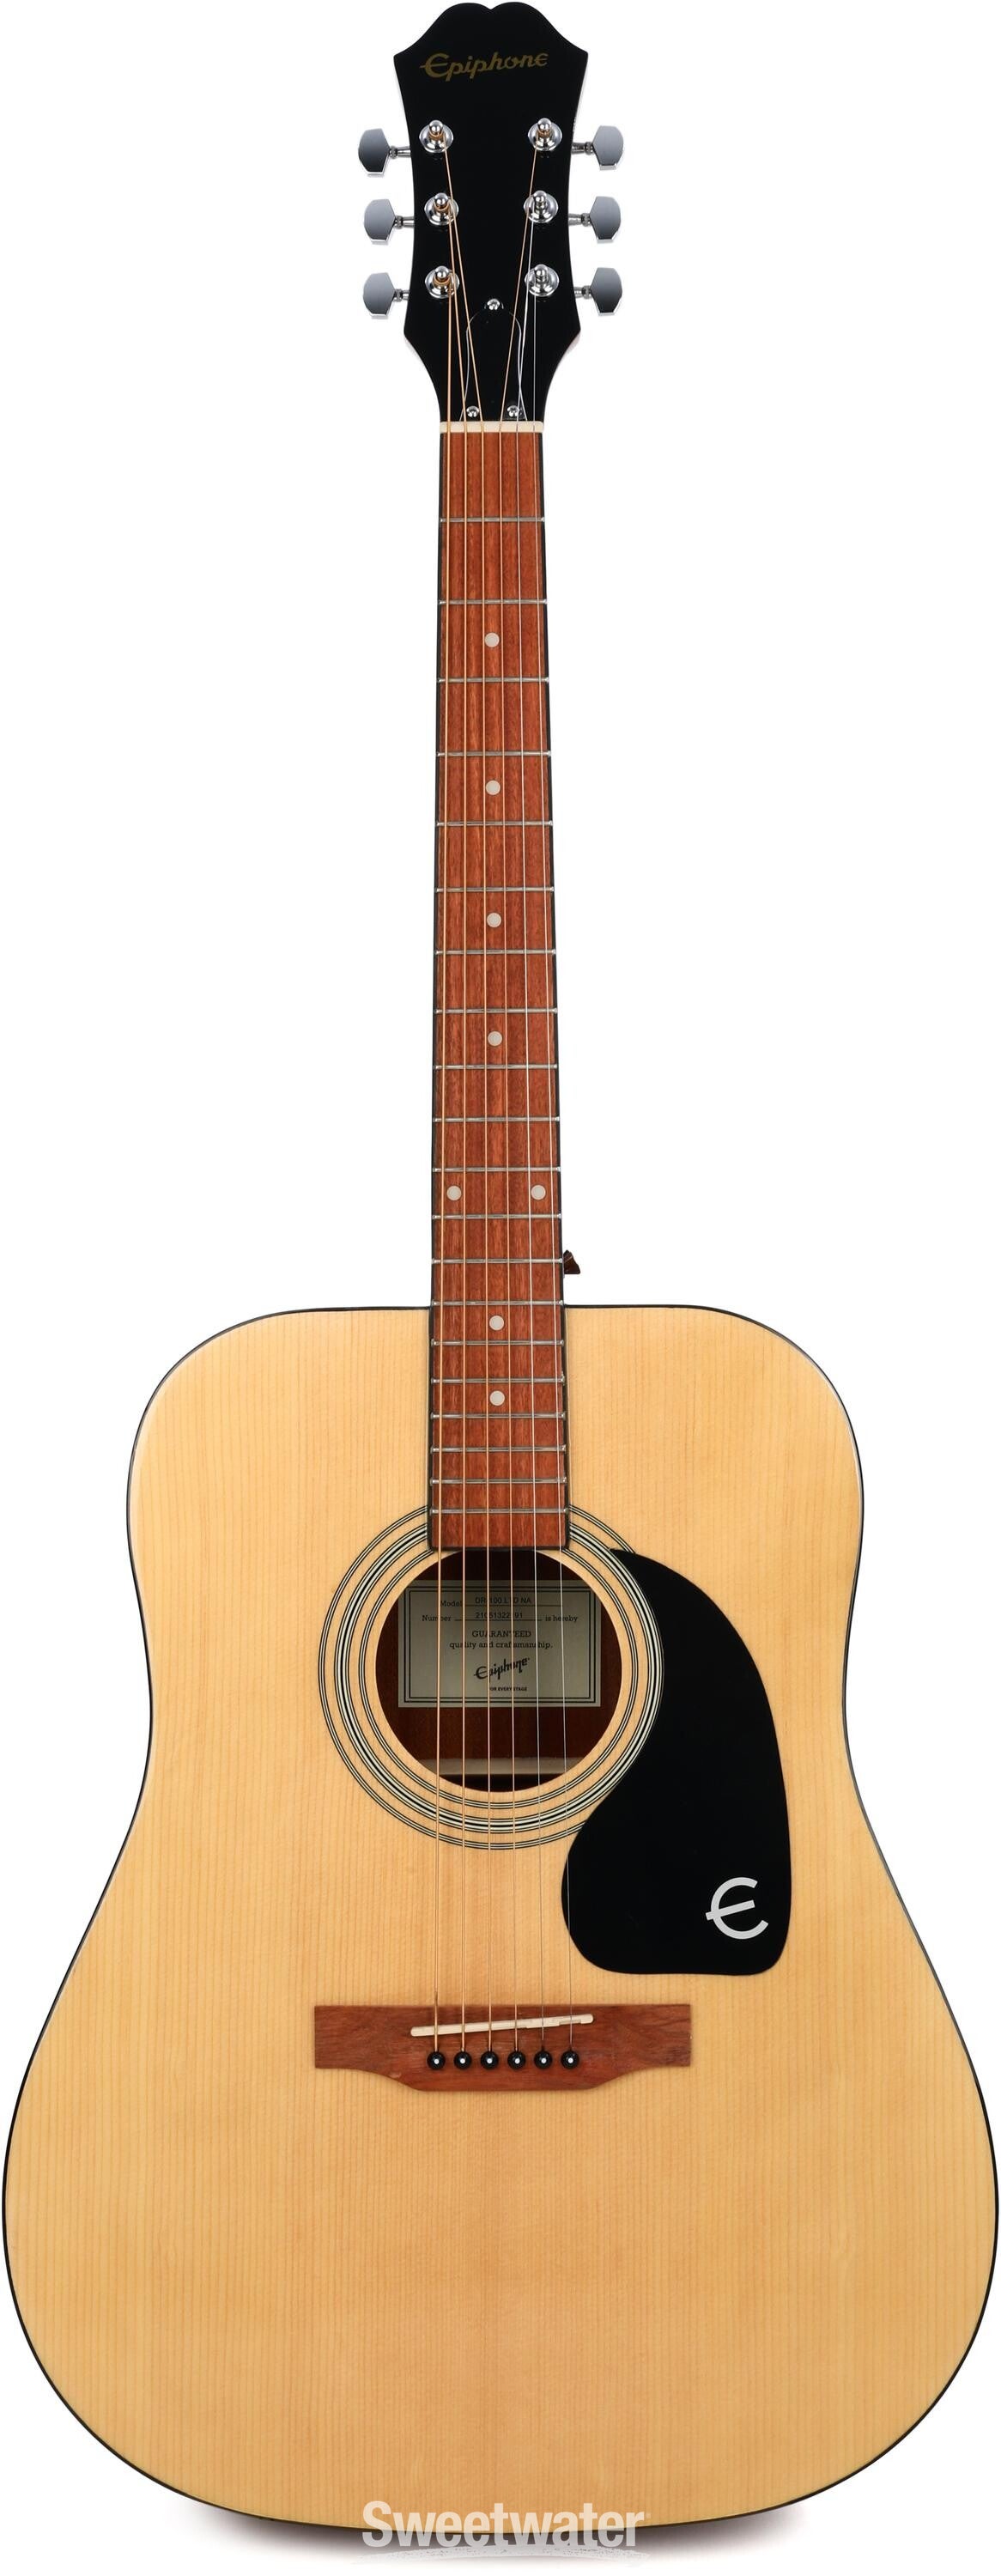 Epiphone Songmaker Acoustic Guitar Player Pack (DR-100) - Natural |  Sweetwater